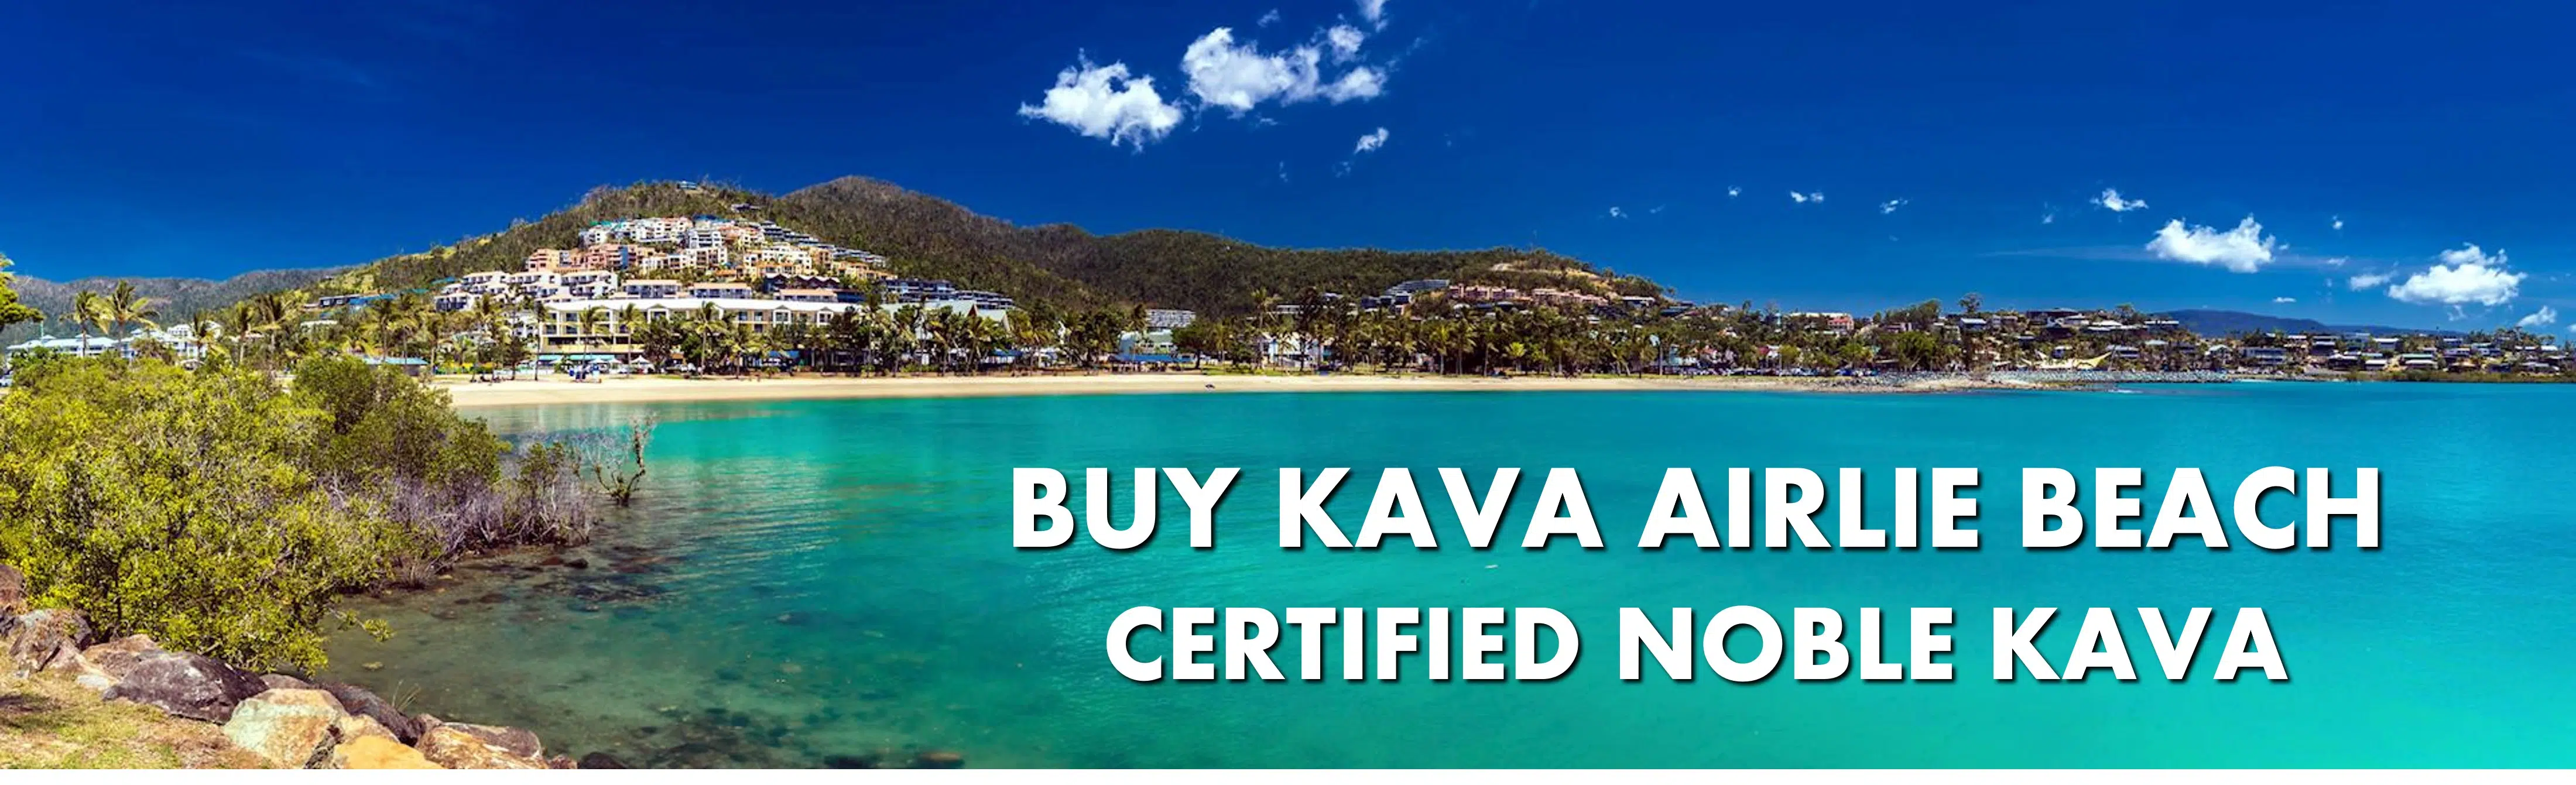 Beach scene in Airlie Beach Queensland with caption Buy Kava Airlie Beach Certified Noble Kava